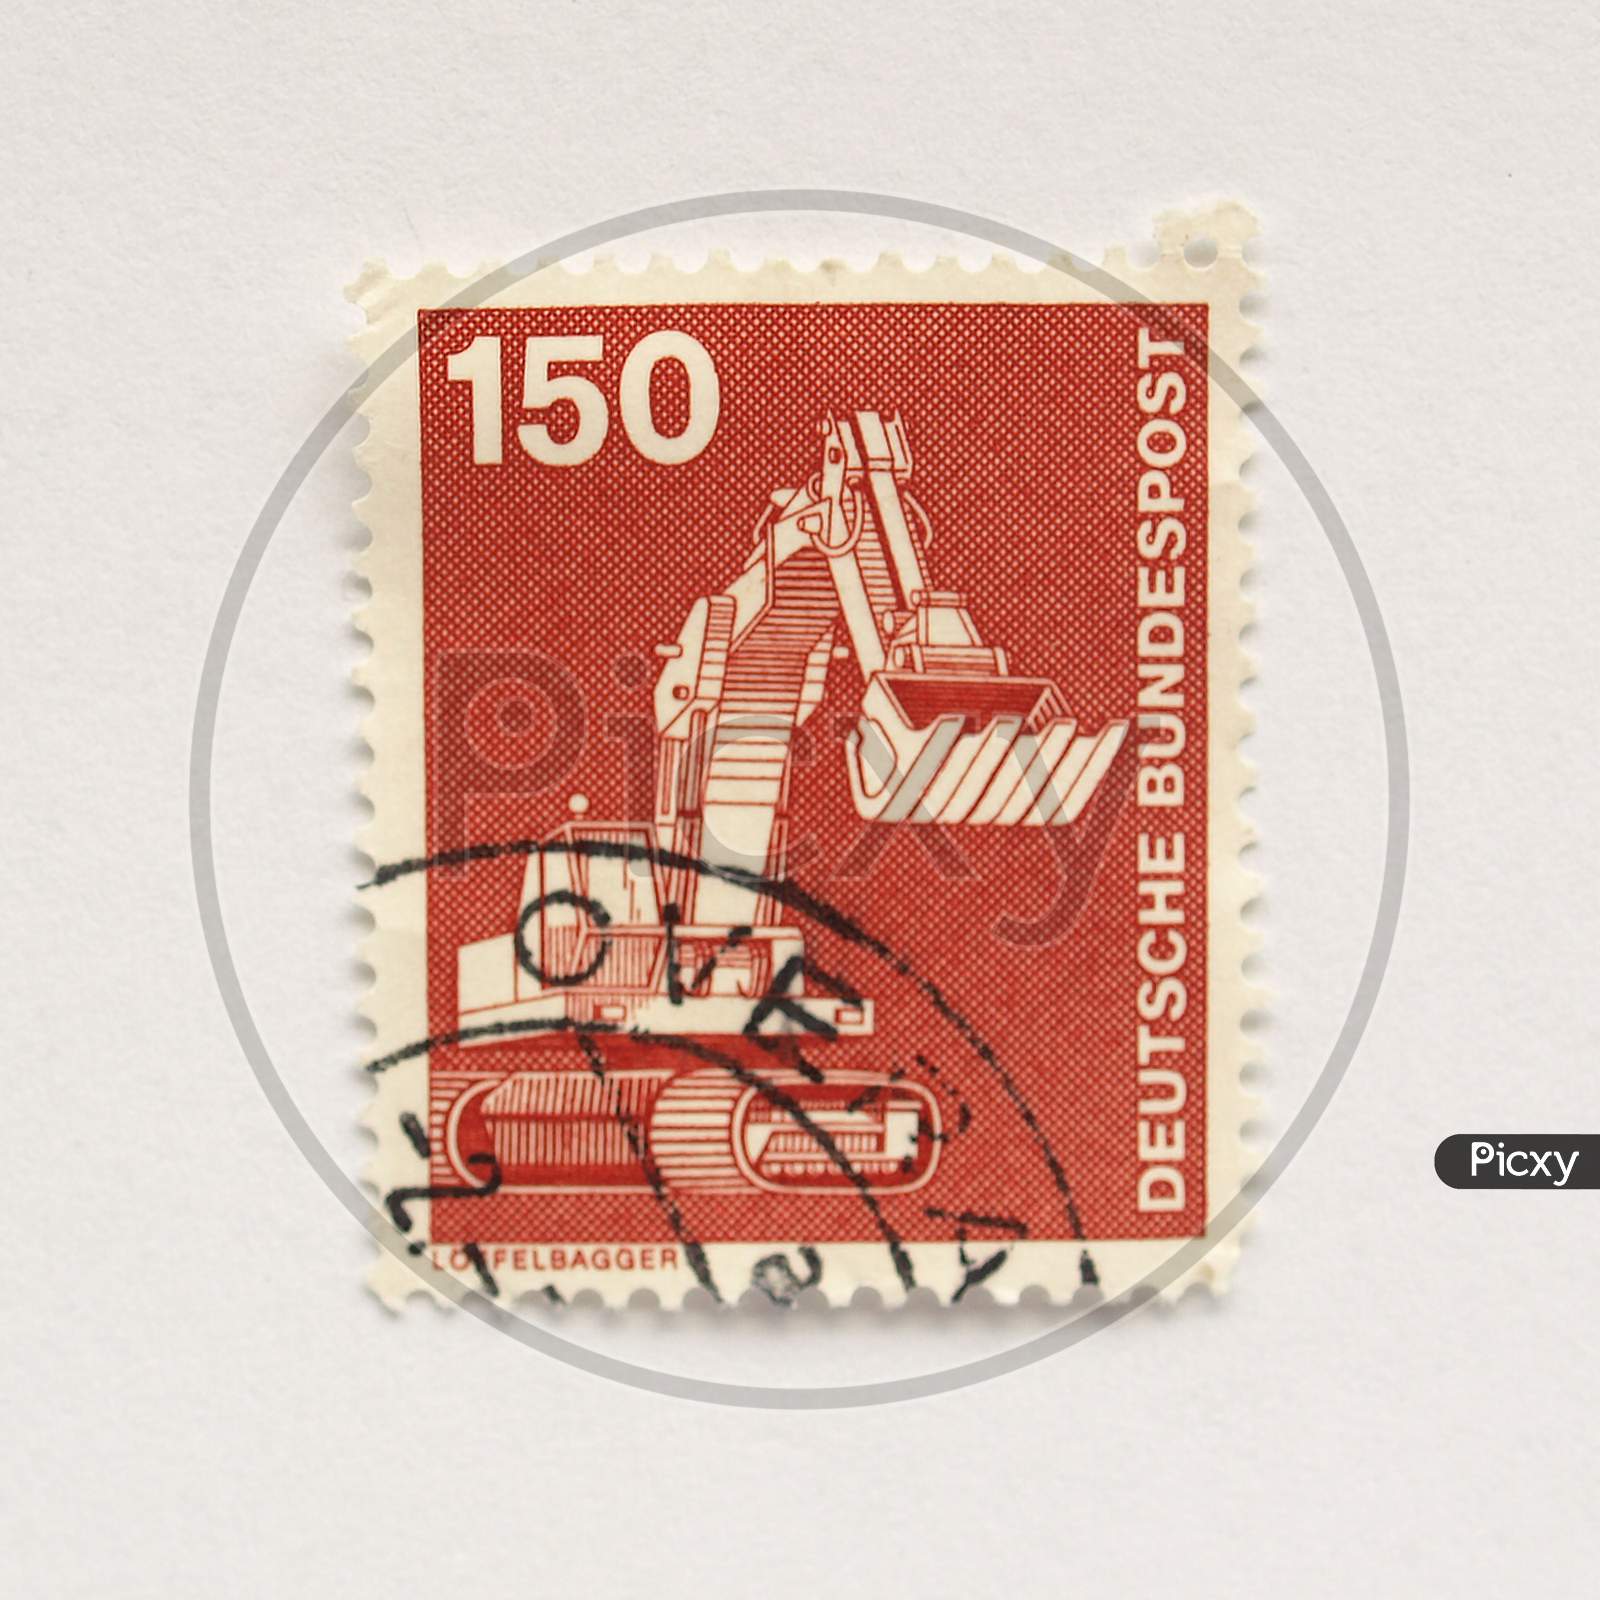 German Postage Stamp From Germany (European Union)